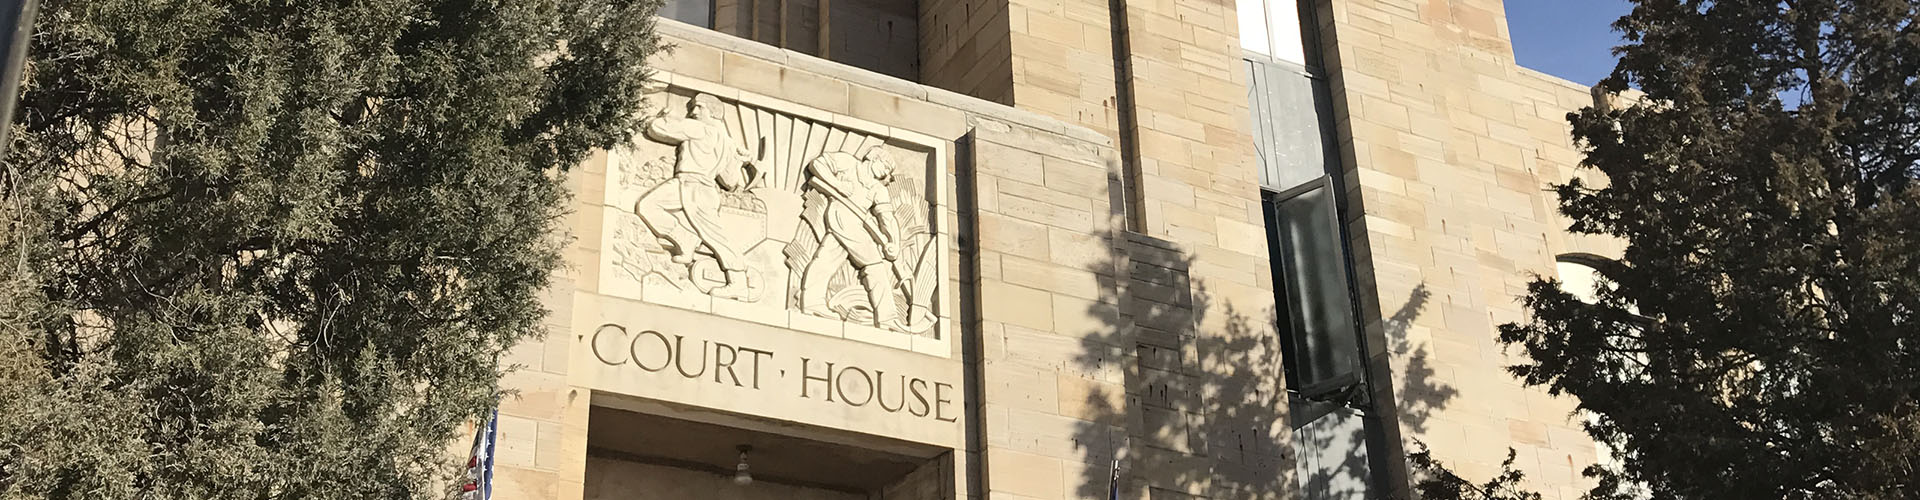 Courthouse art deco relief showing miner and farmer